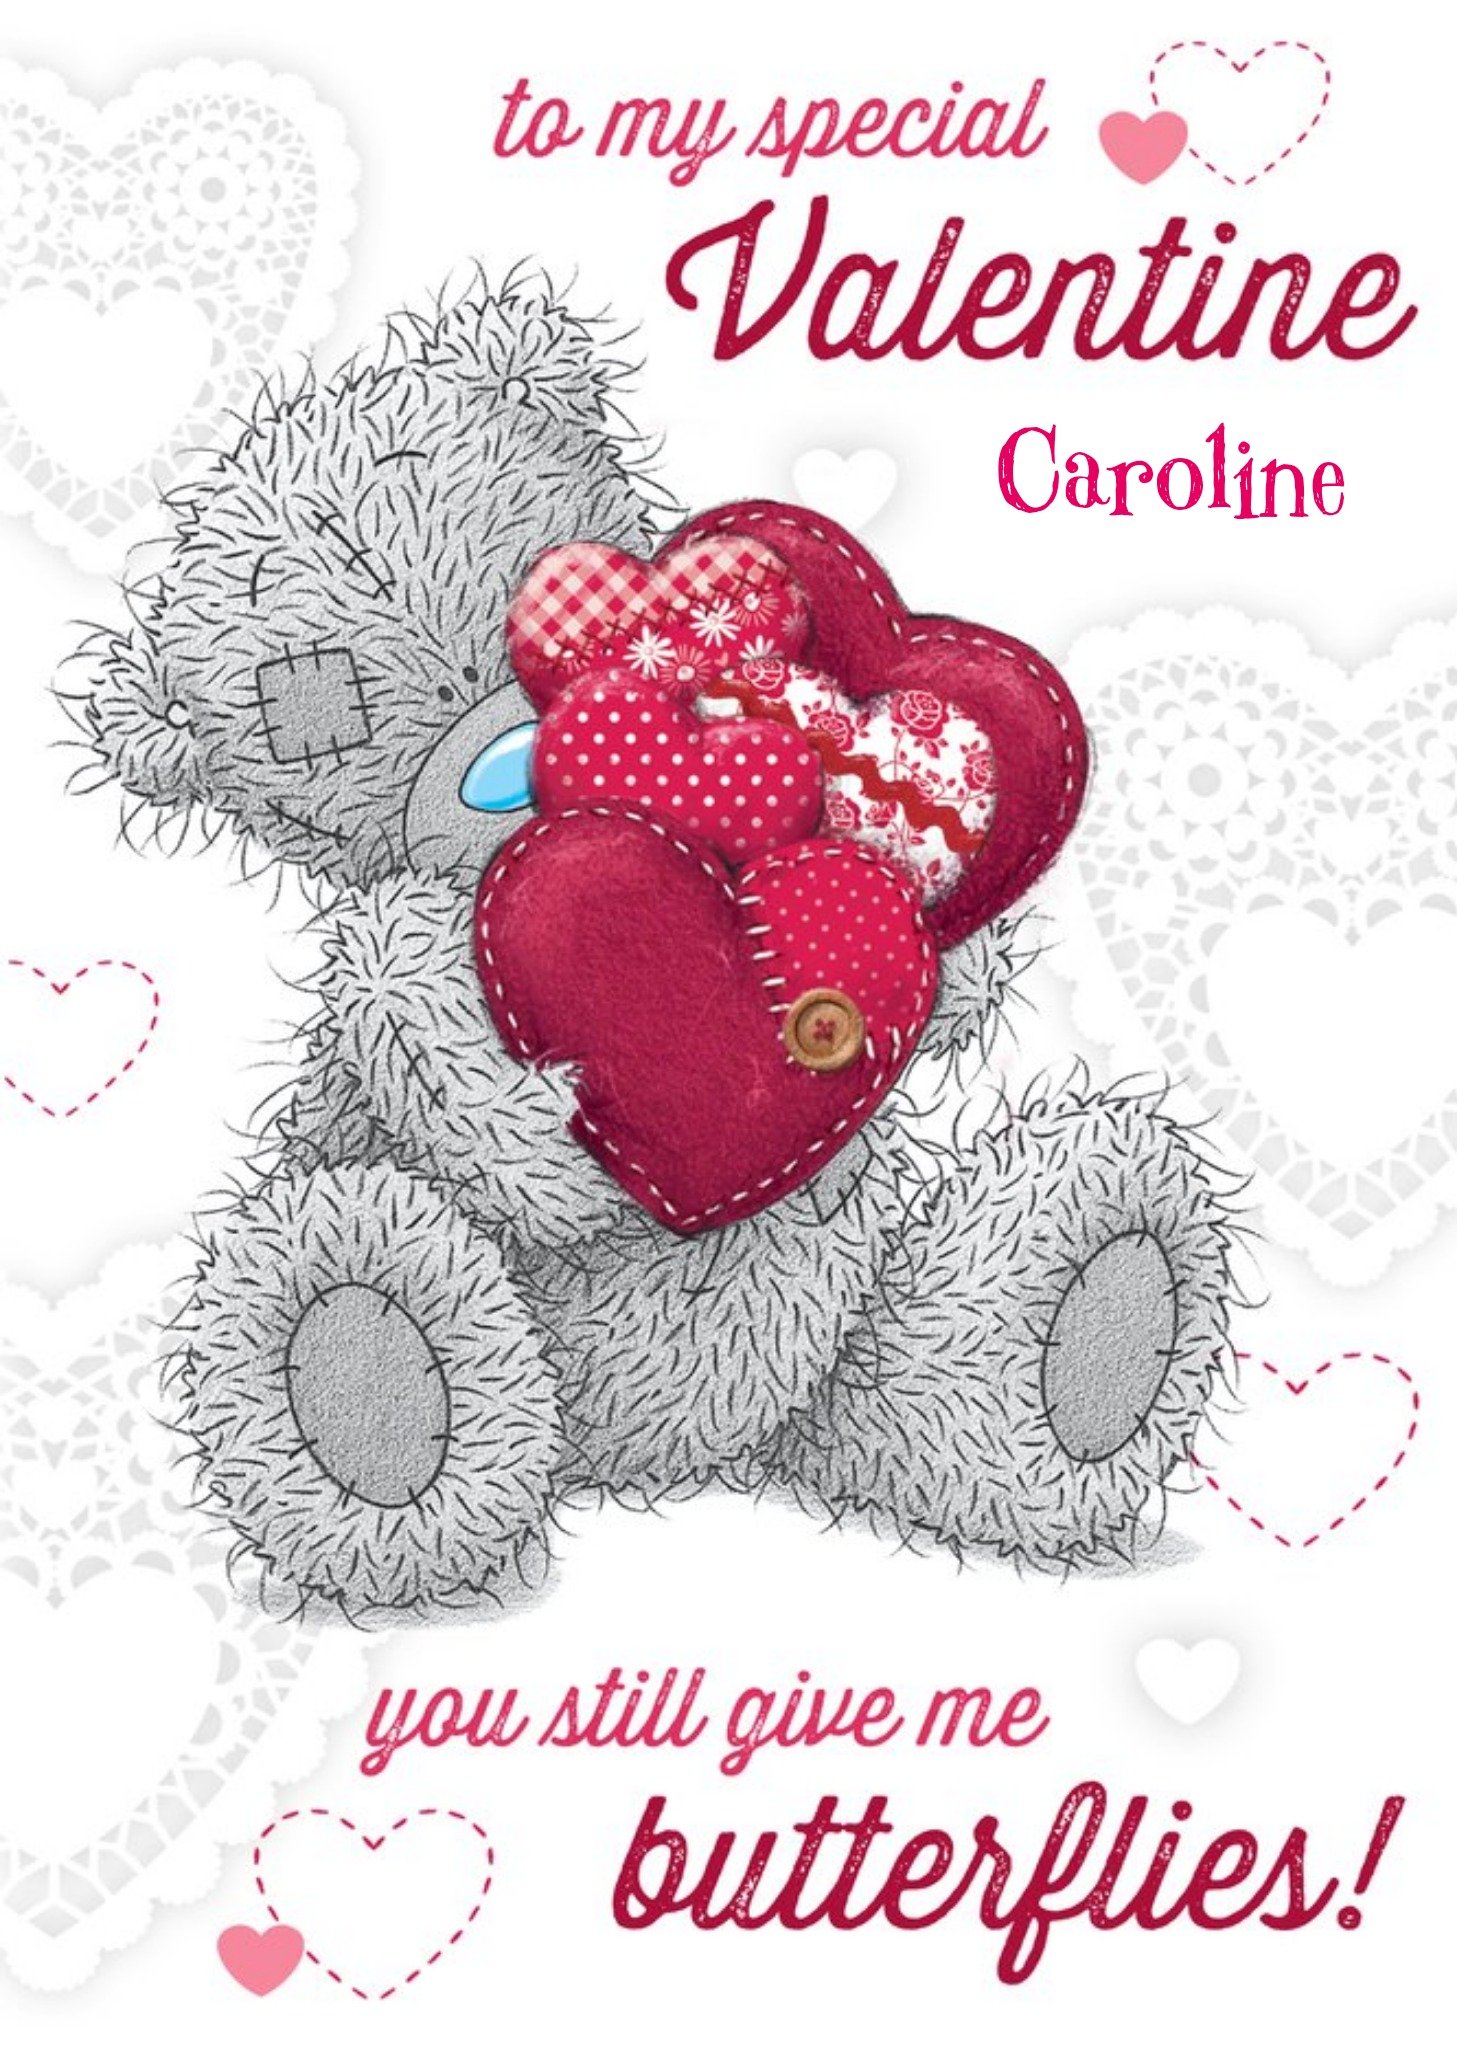 Me To You Tatty Teddy With Hearts You Give Me Butterflies Happy Valentine's Day Card, Large